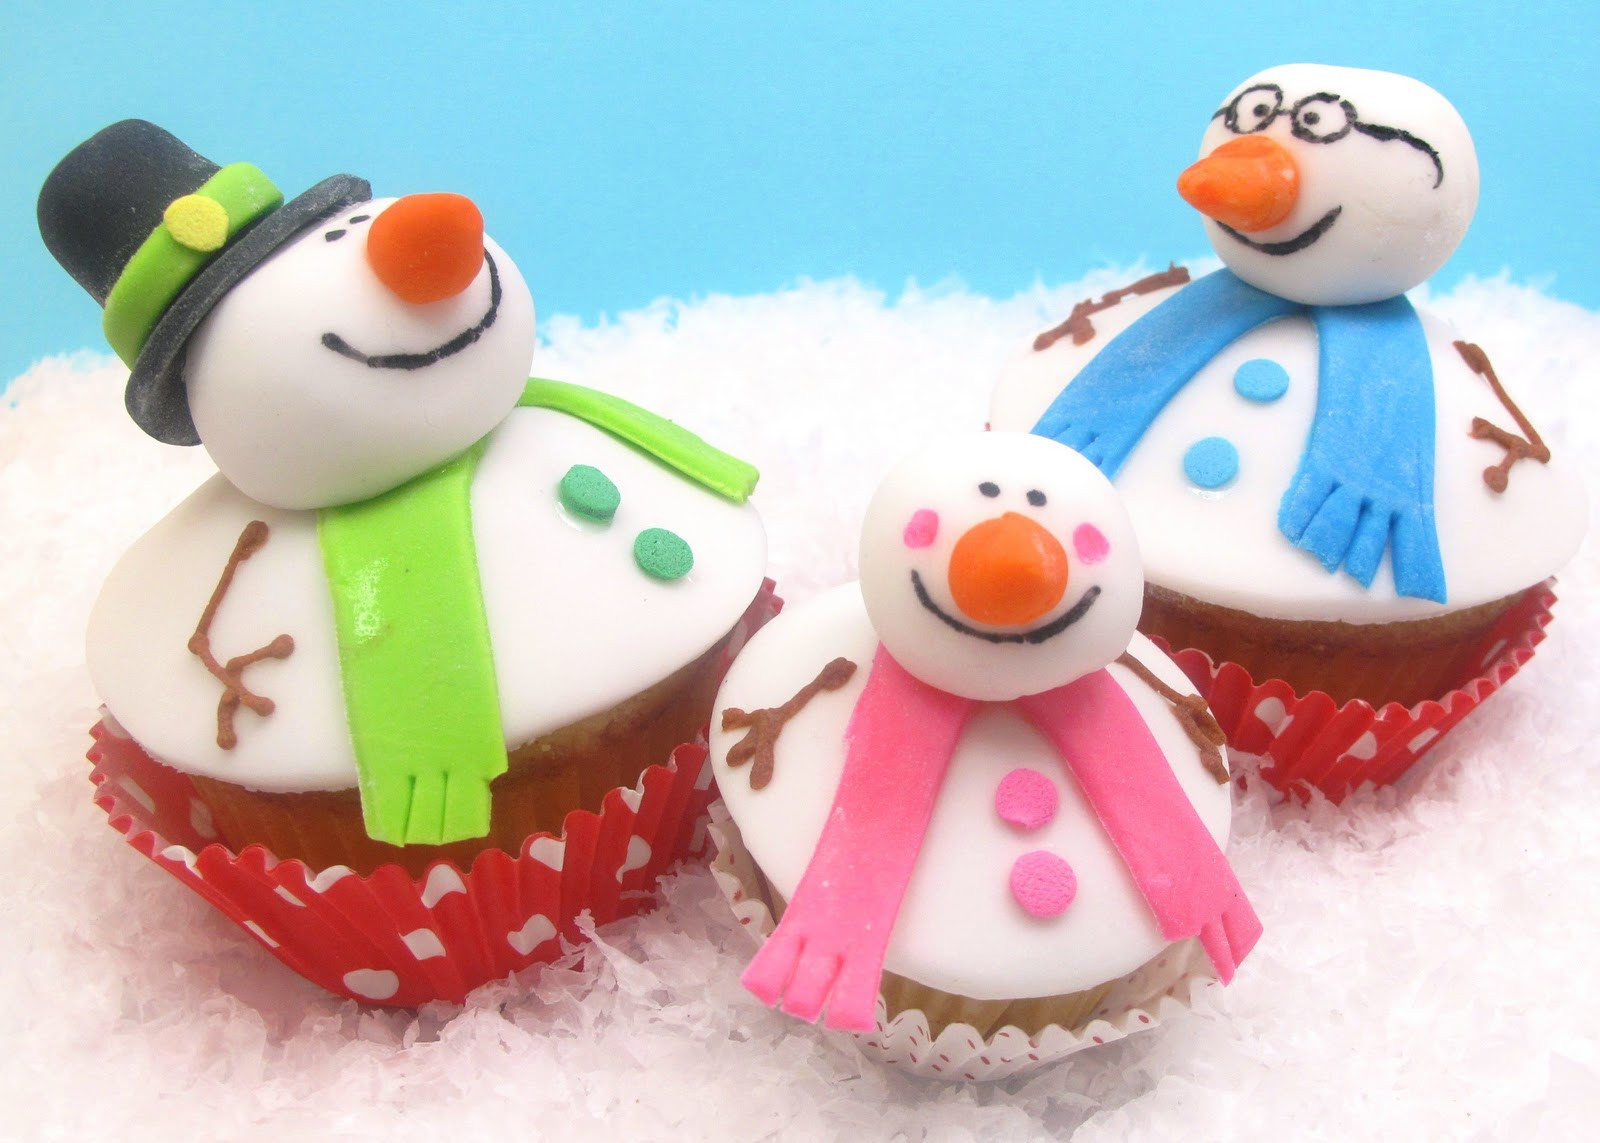 Cute Christmas Cupcakes
 Cute Food For Kids 41 Cutest and Most Creative Christmas